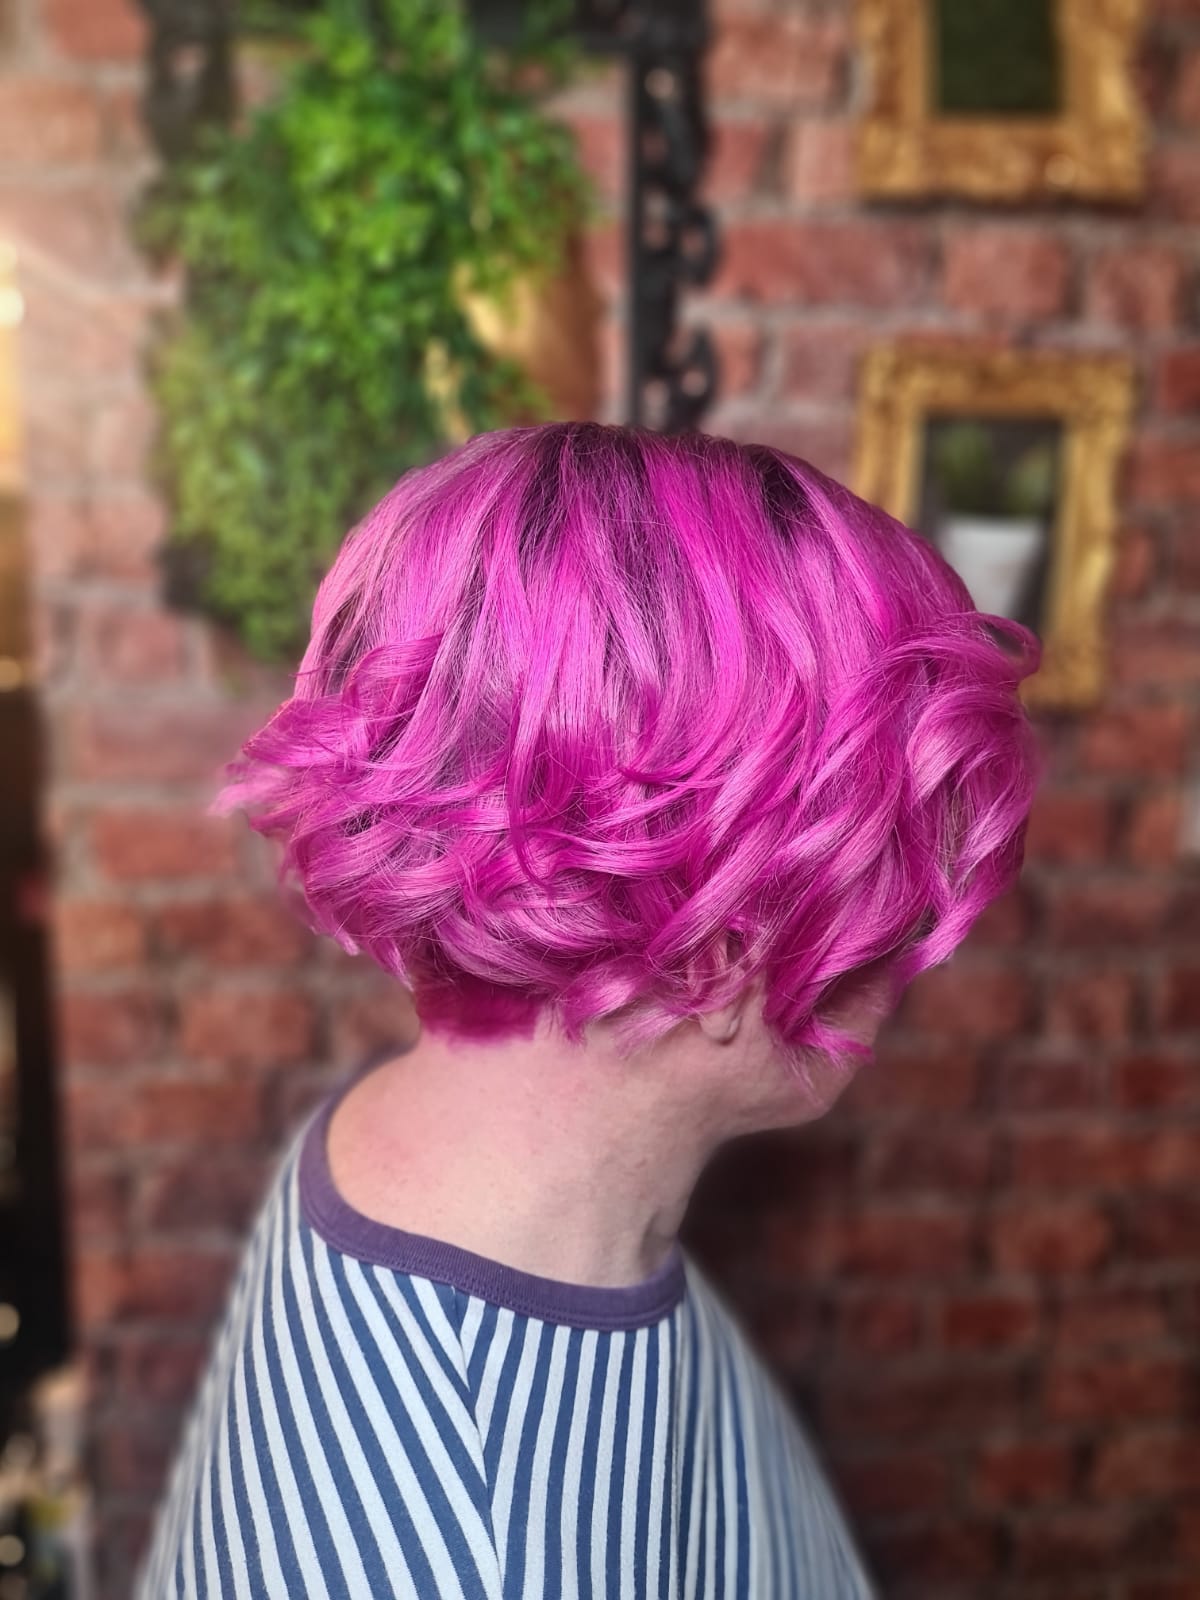 Another Client happy to go Pink for October